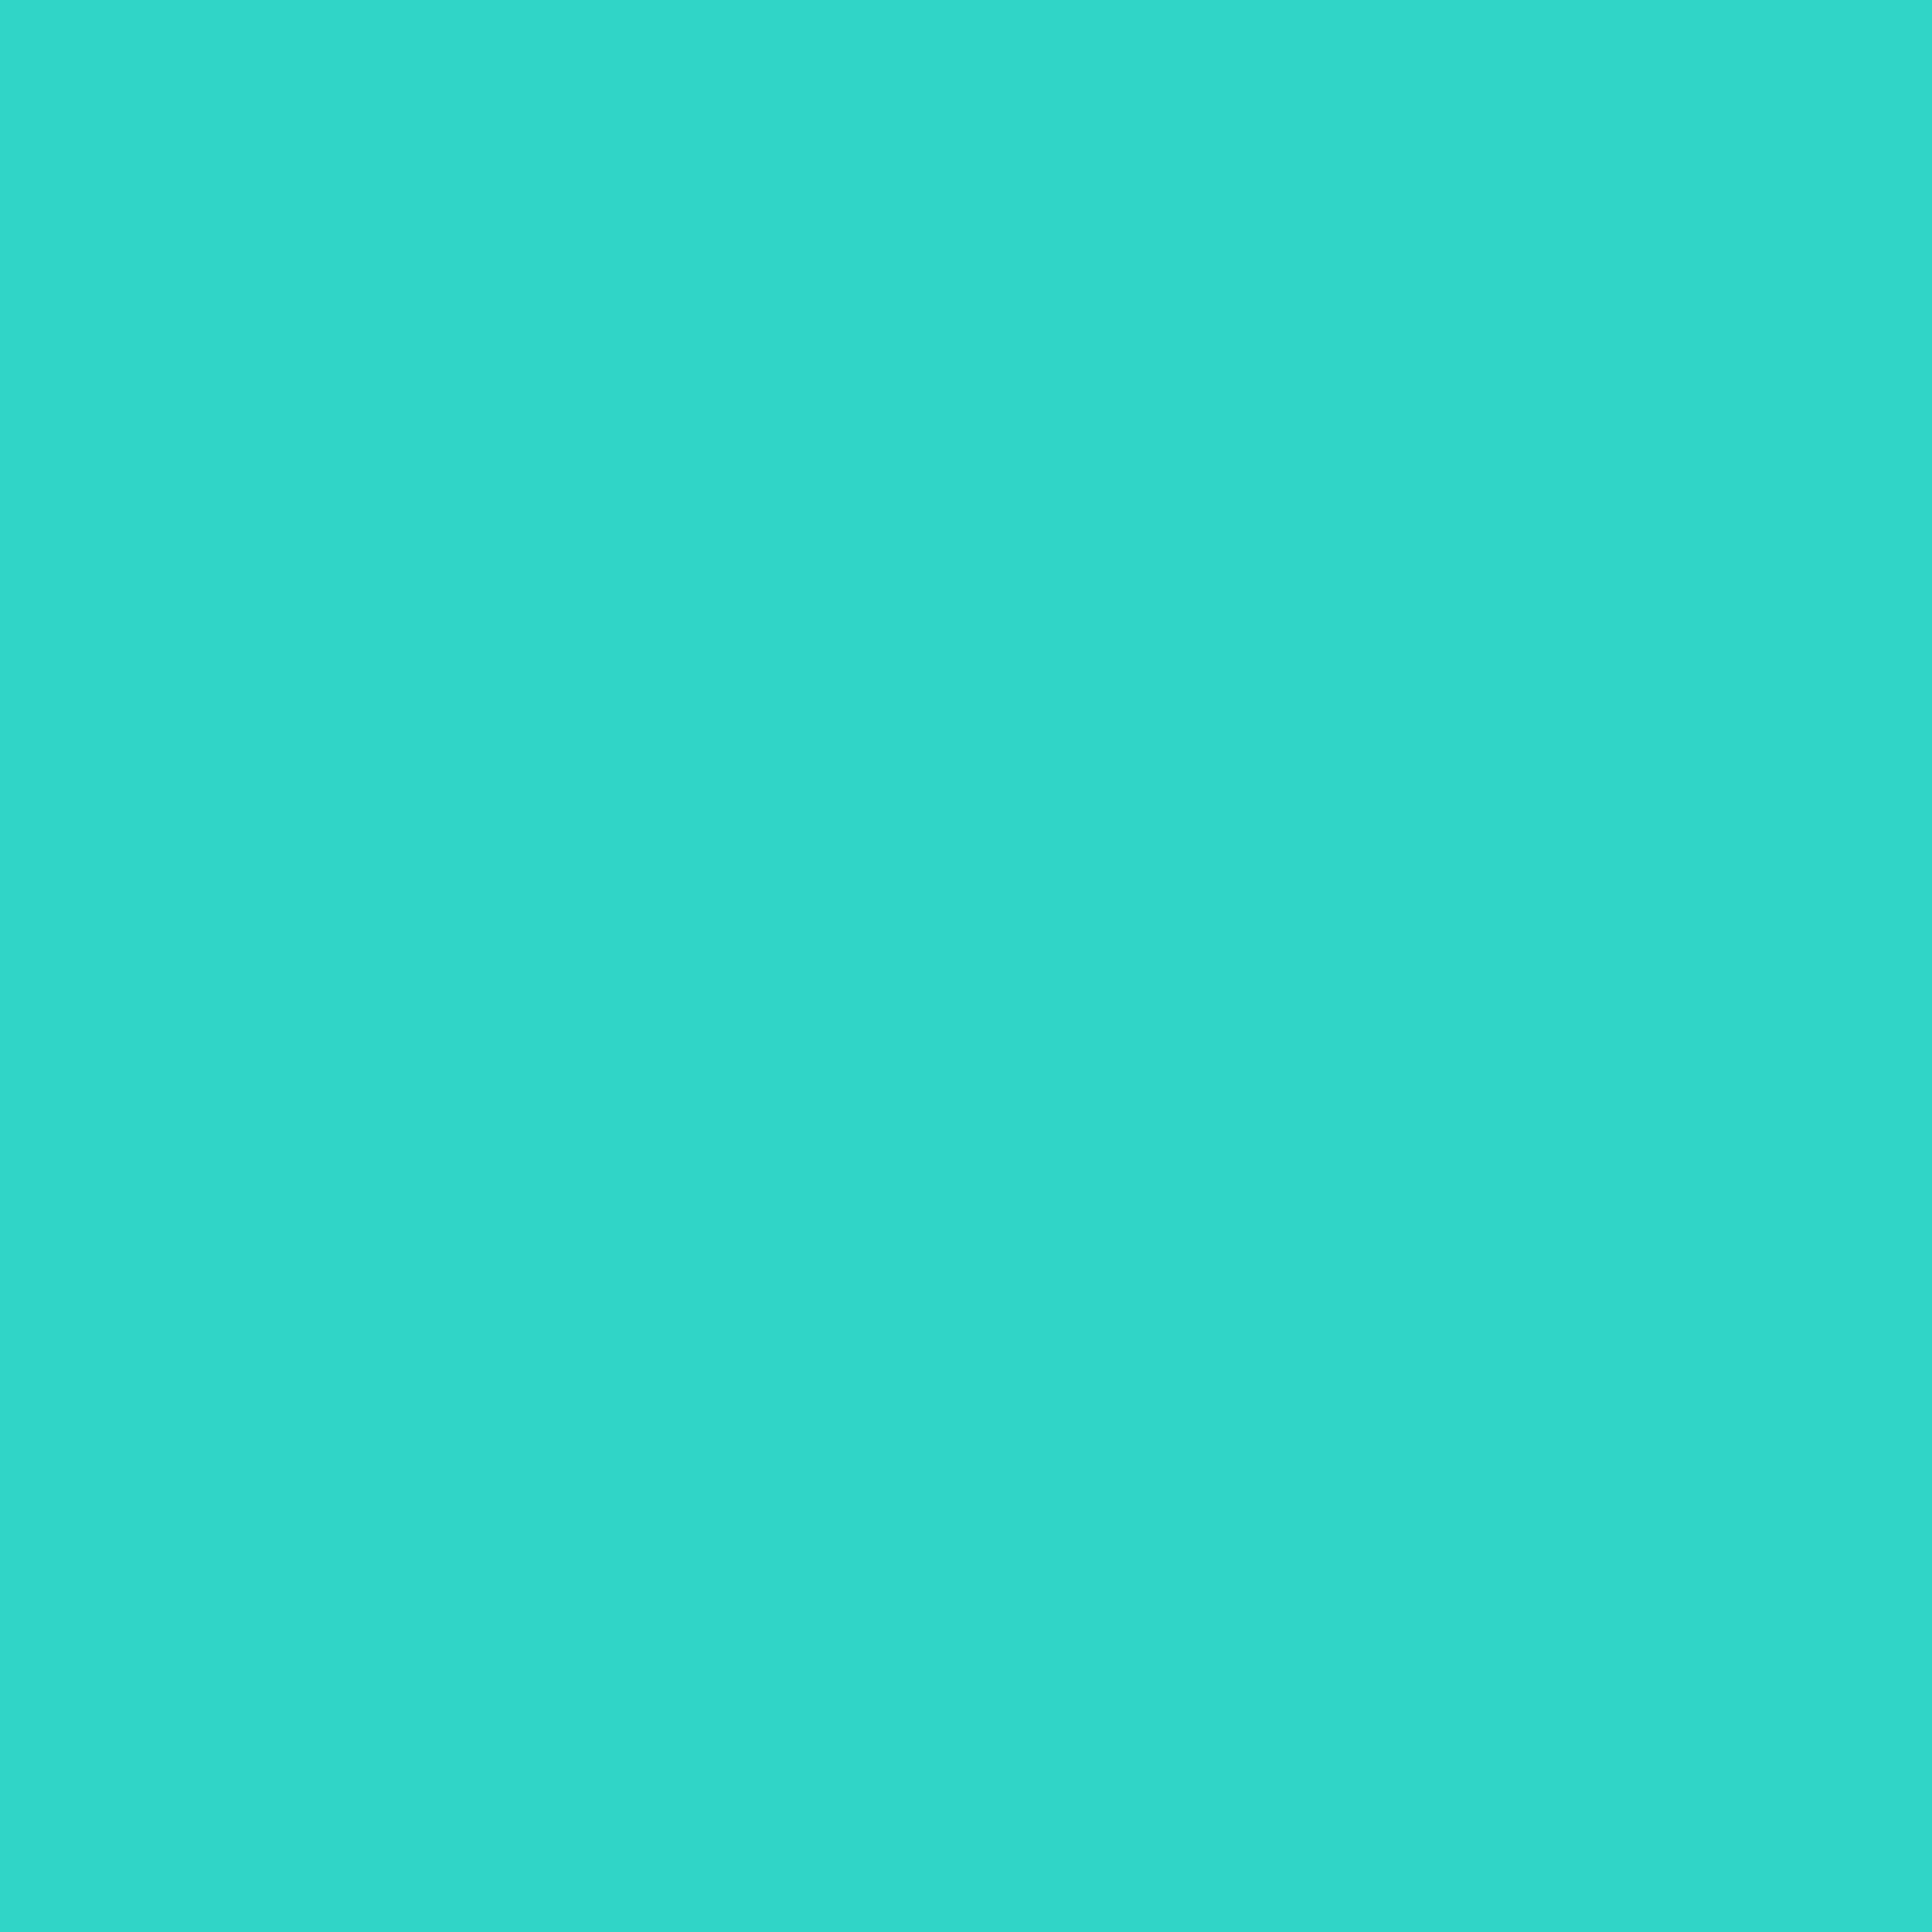 2732x2732 Turquoise Solid Color Background